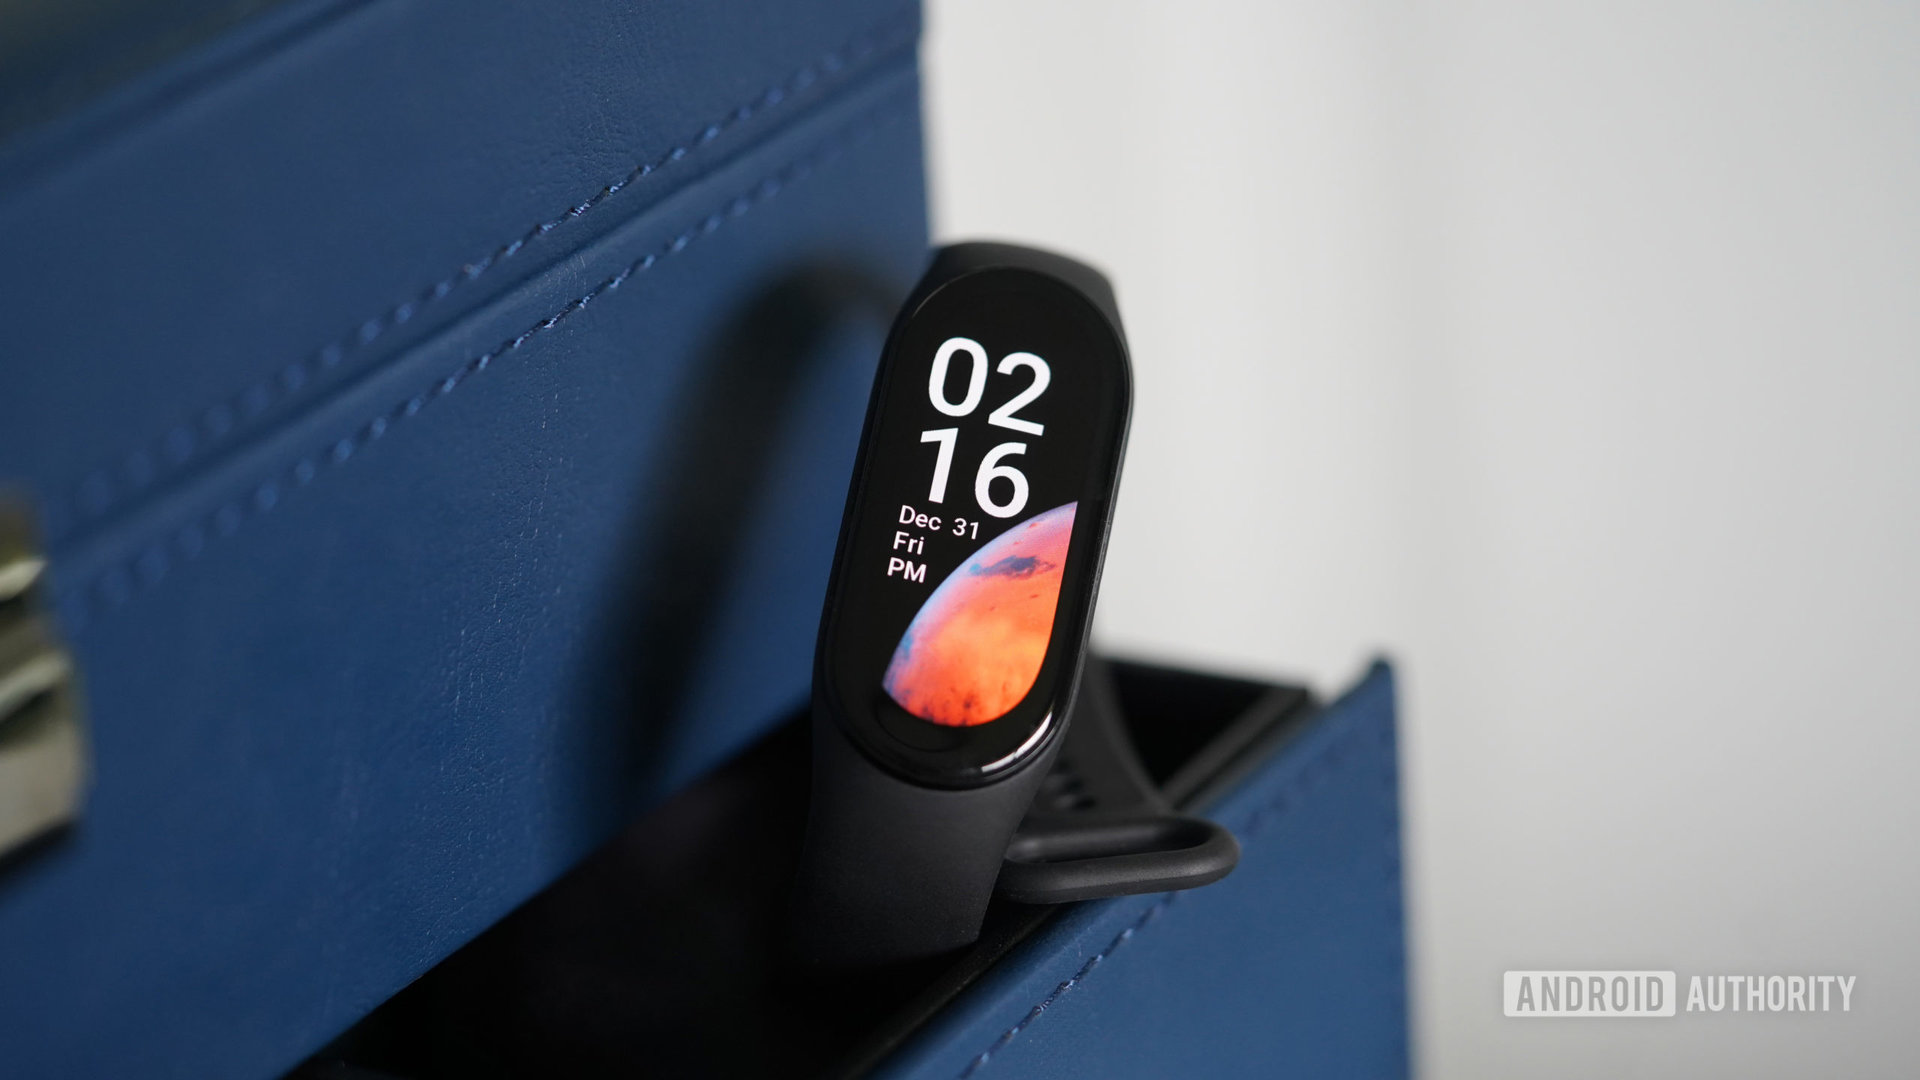 A Xiaomi Mi Band 7 represents an inexpensive wearable that we expect to see the next generation of in 2023.